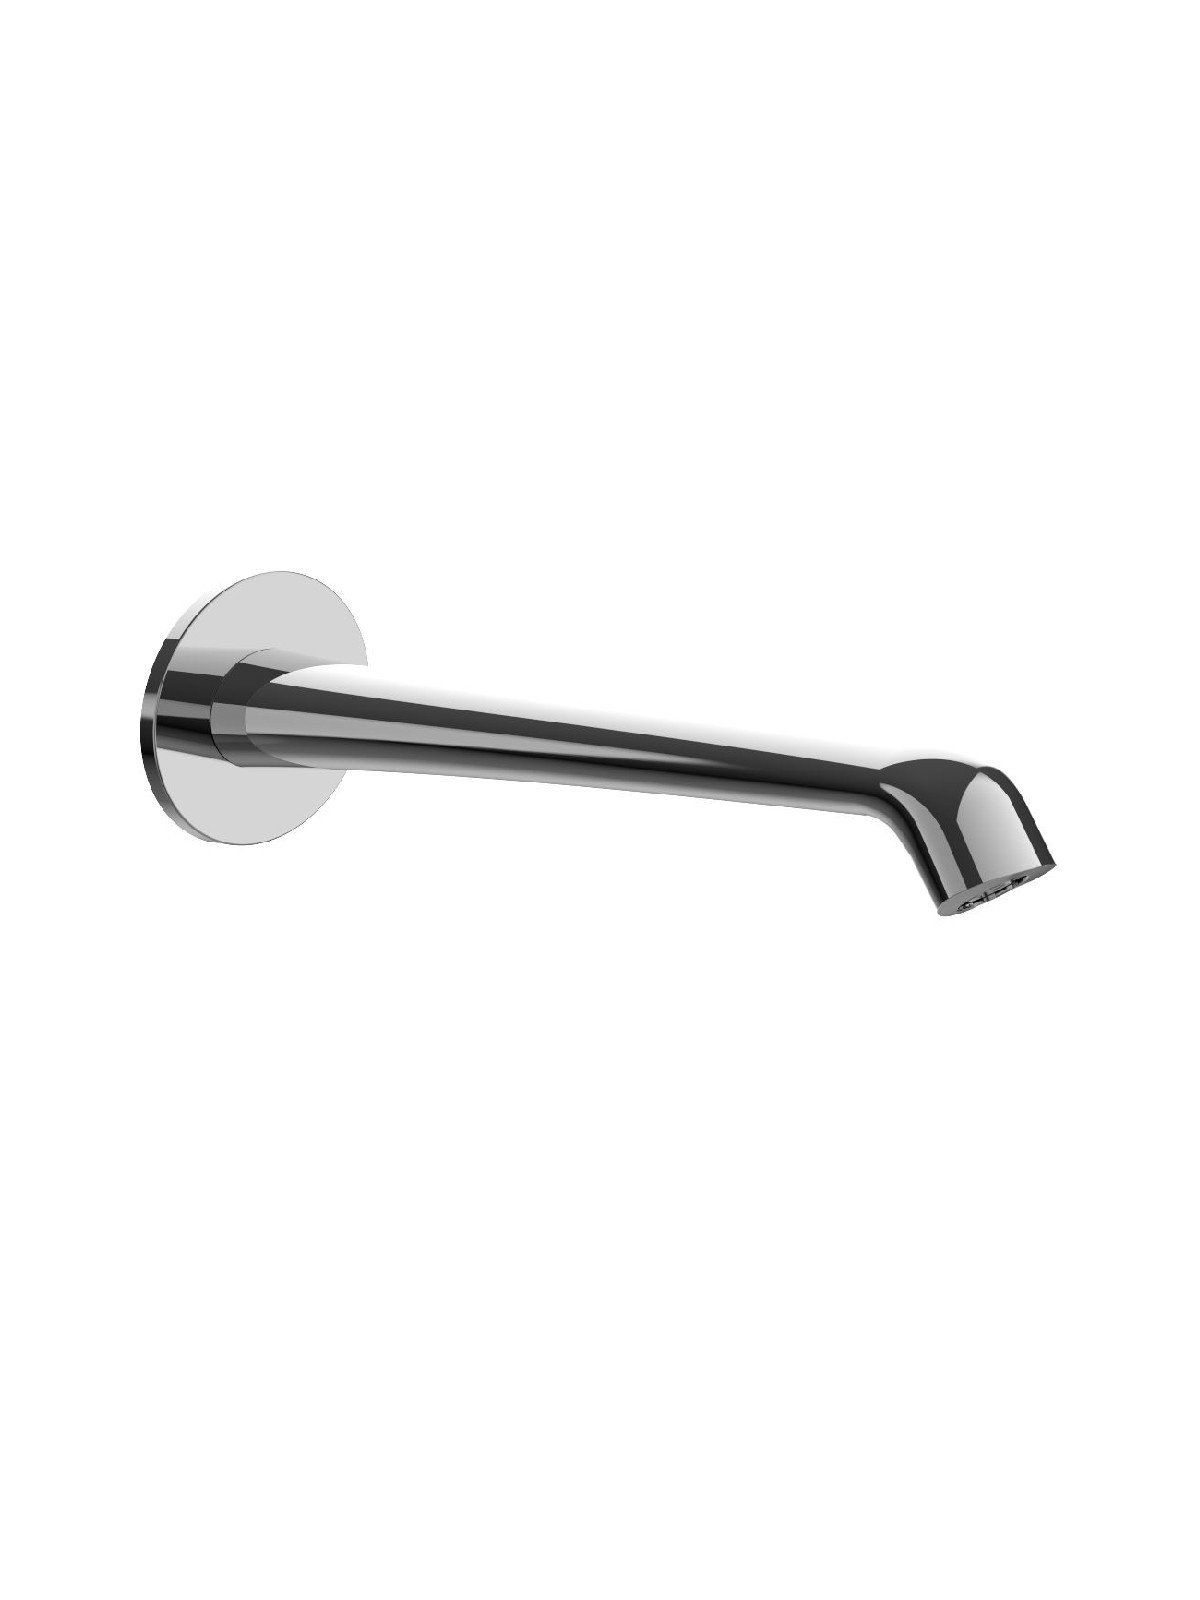 Delizia wall-mounted spout for washbasin mixer